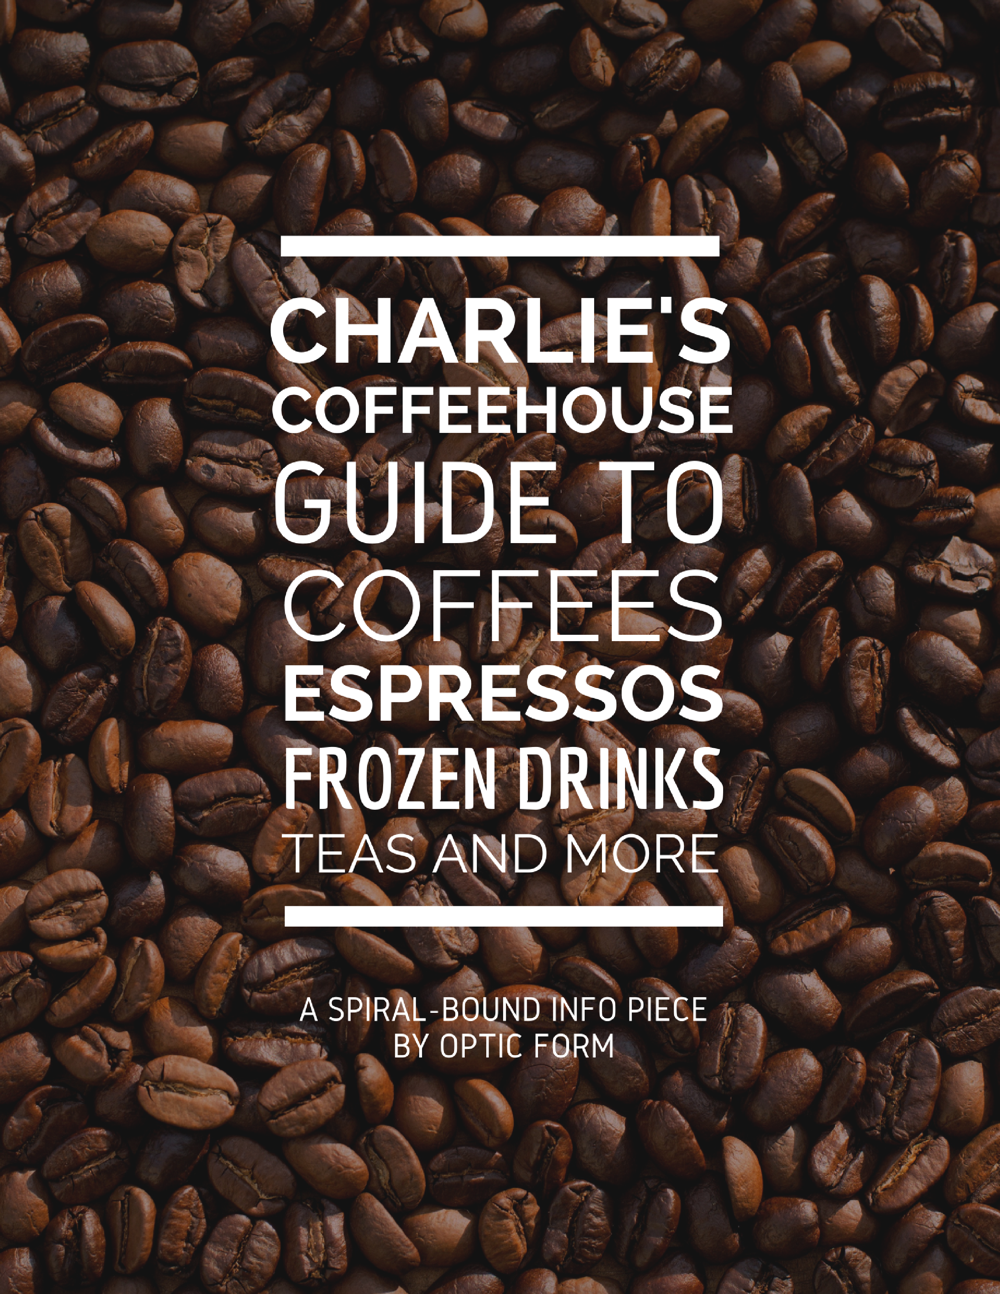 Charlie's Coffeehouse Guide